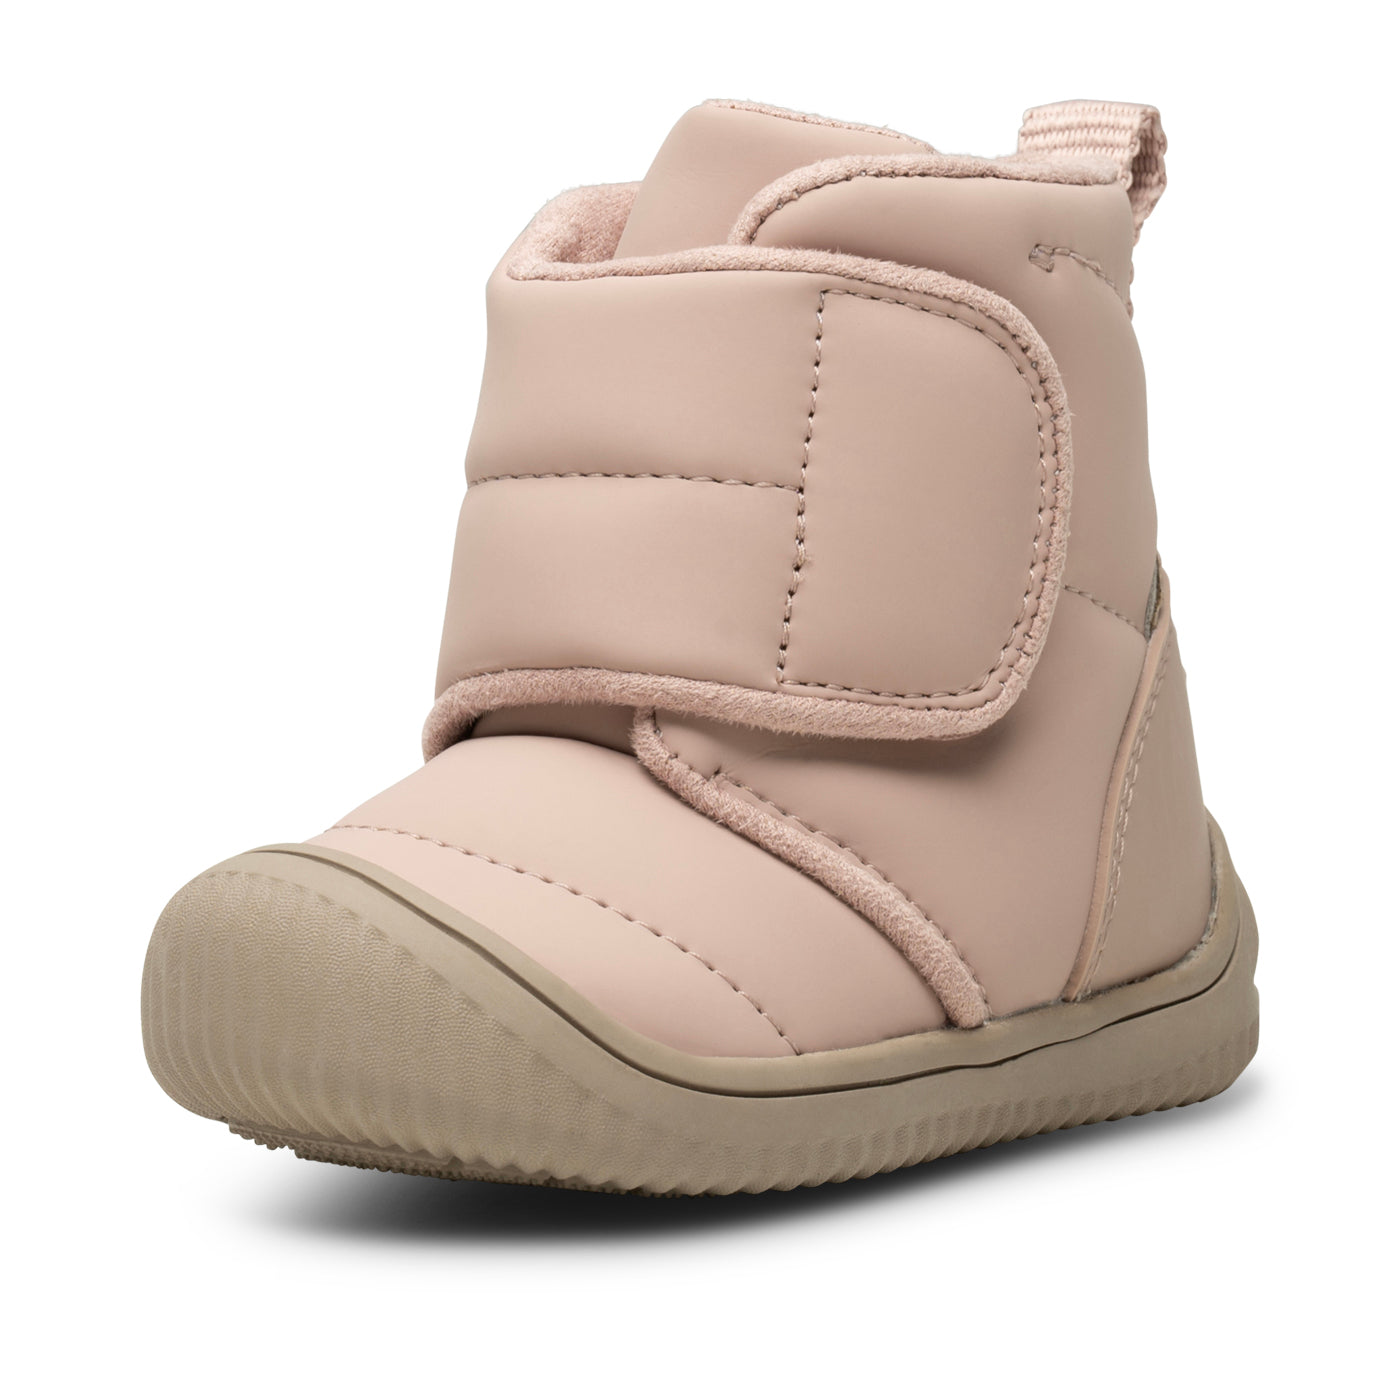 WODEN KIDS Theo Baby Boots 800 Dry Rose